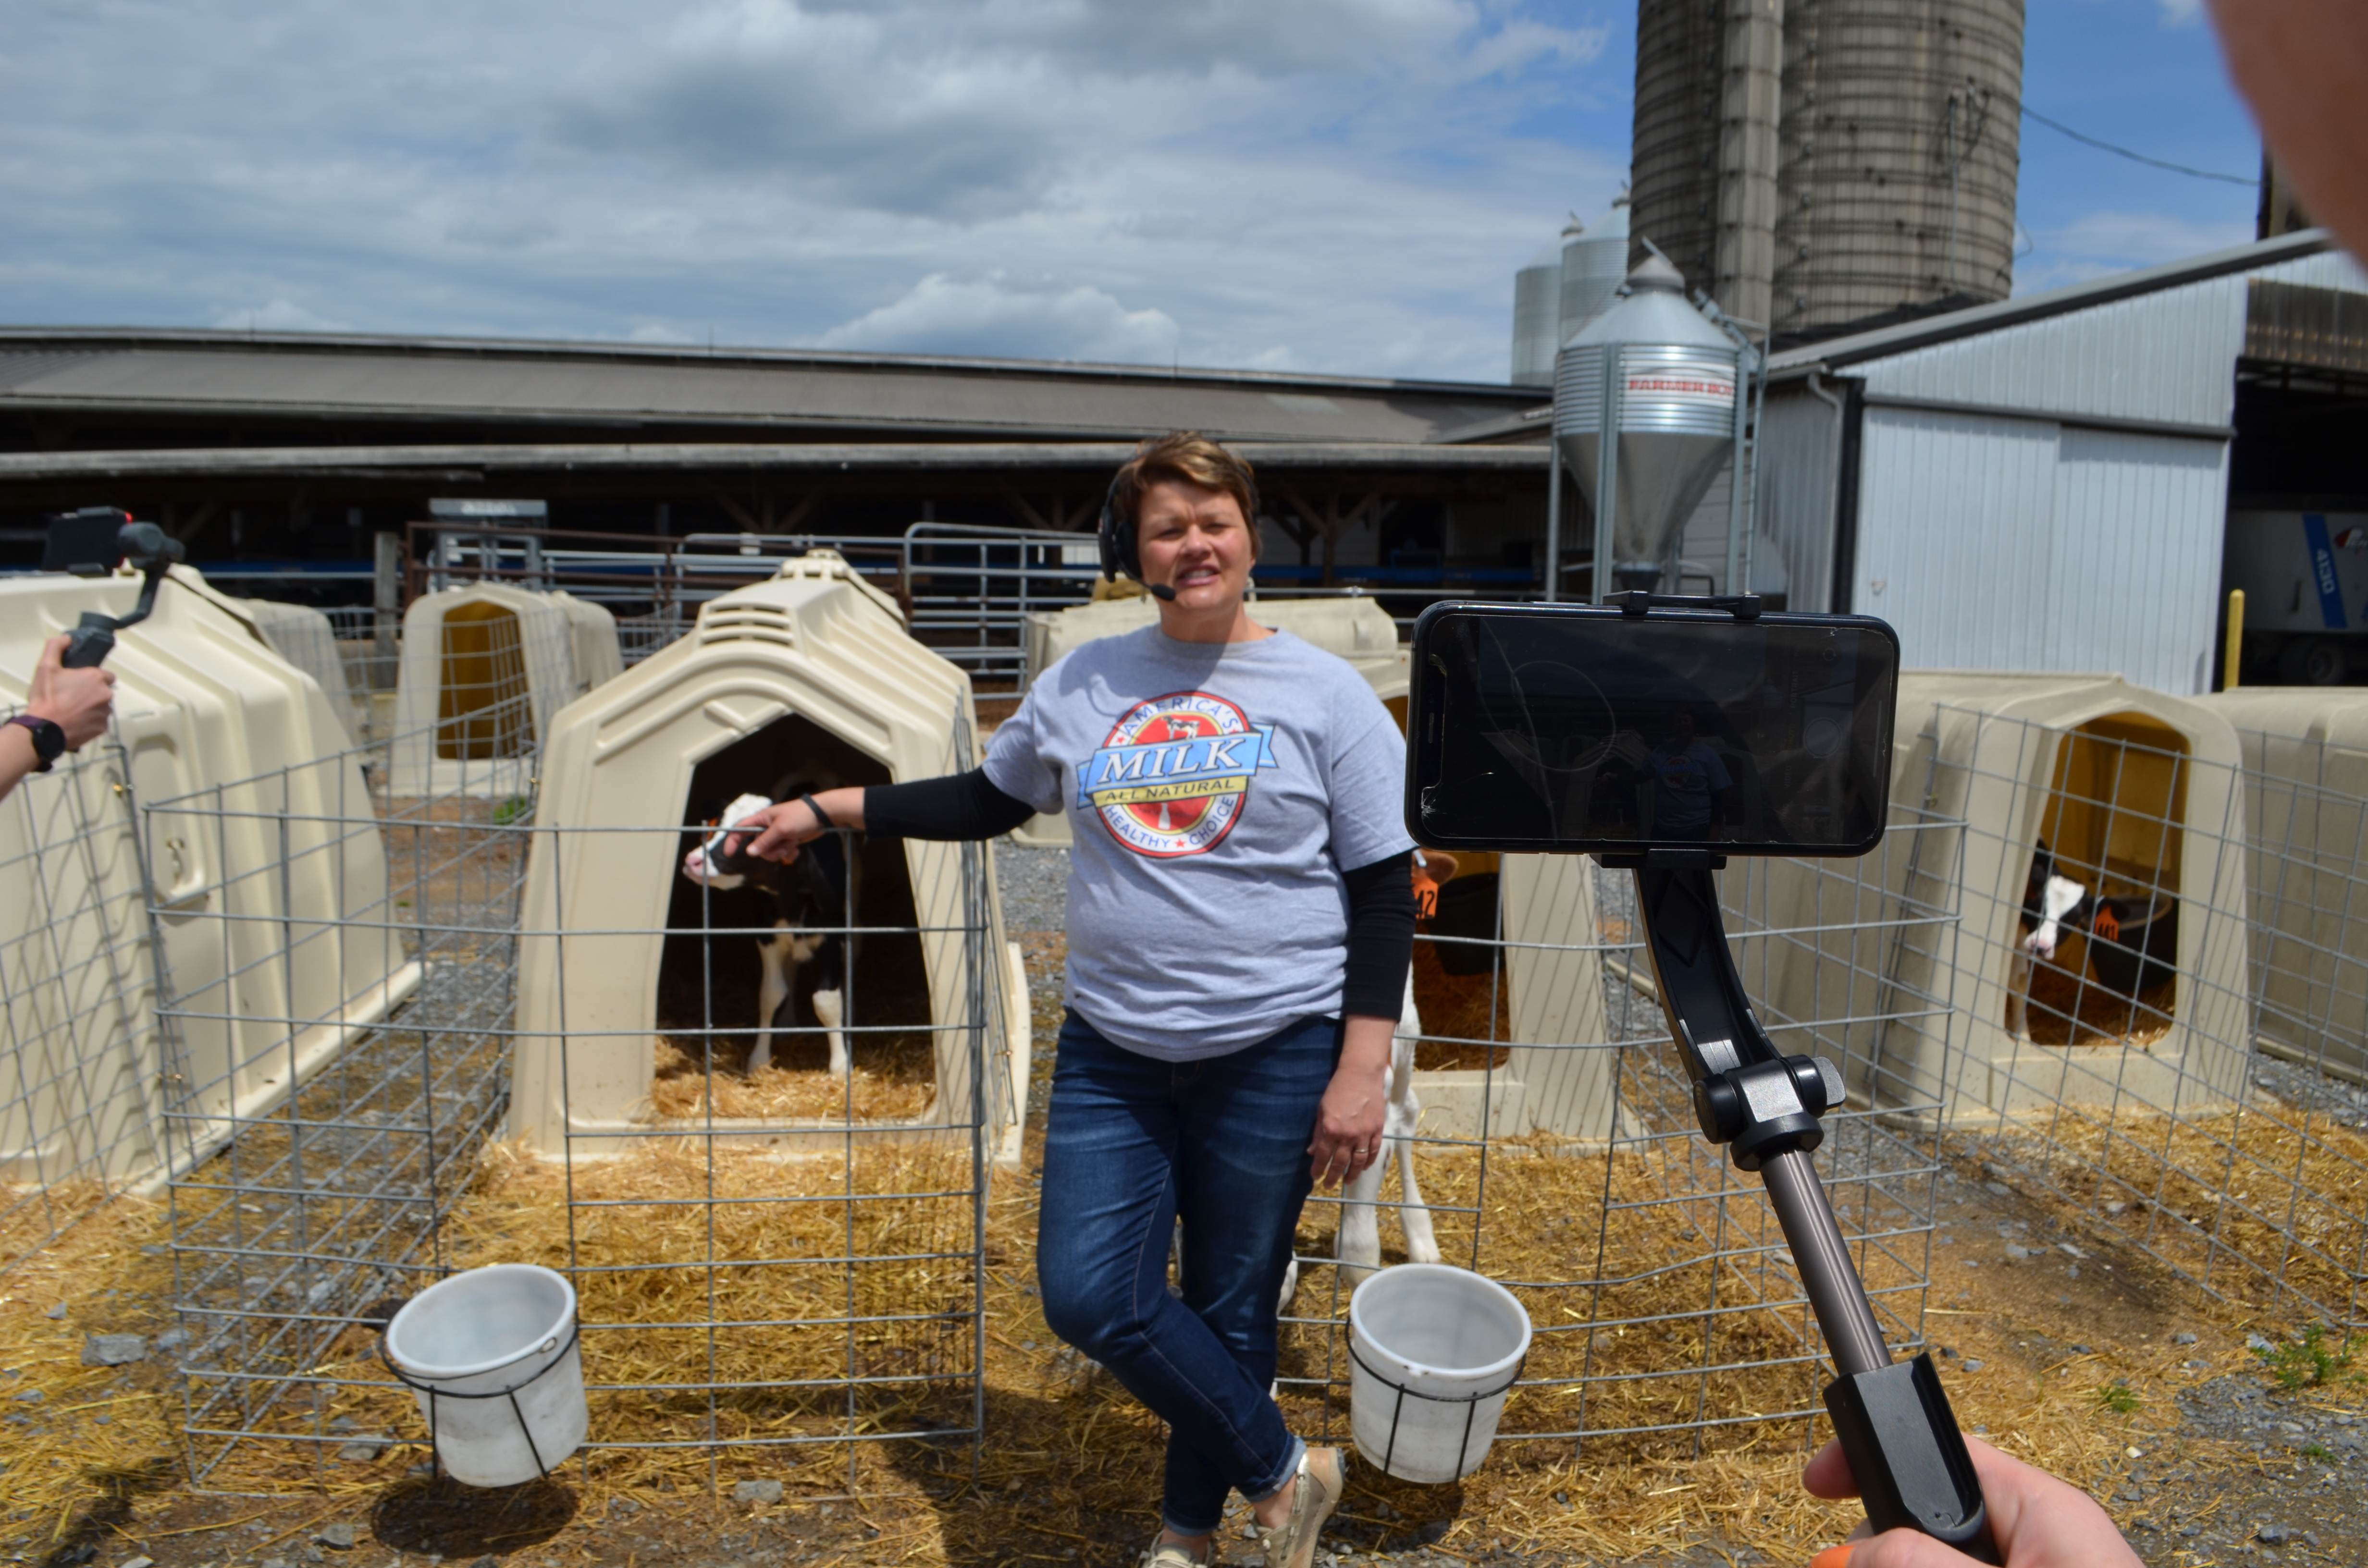 Woman filmed standing in front of a calf pen